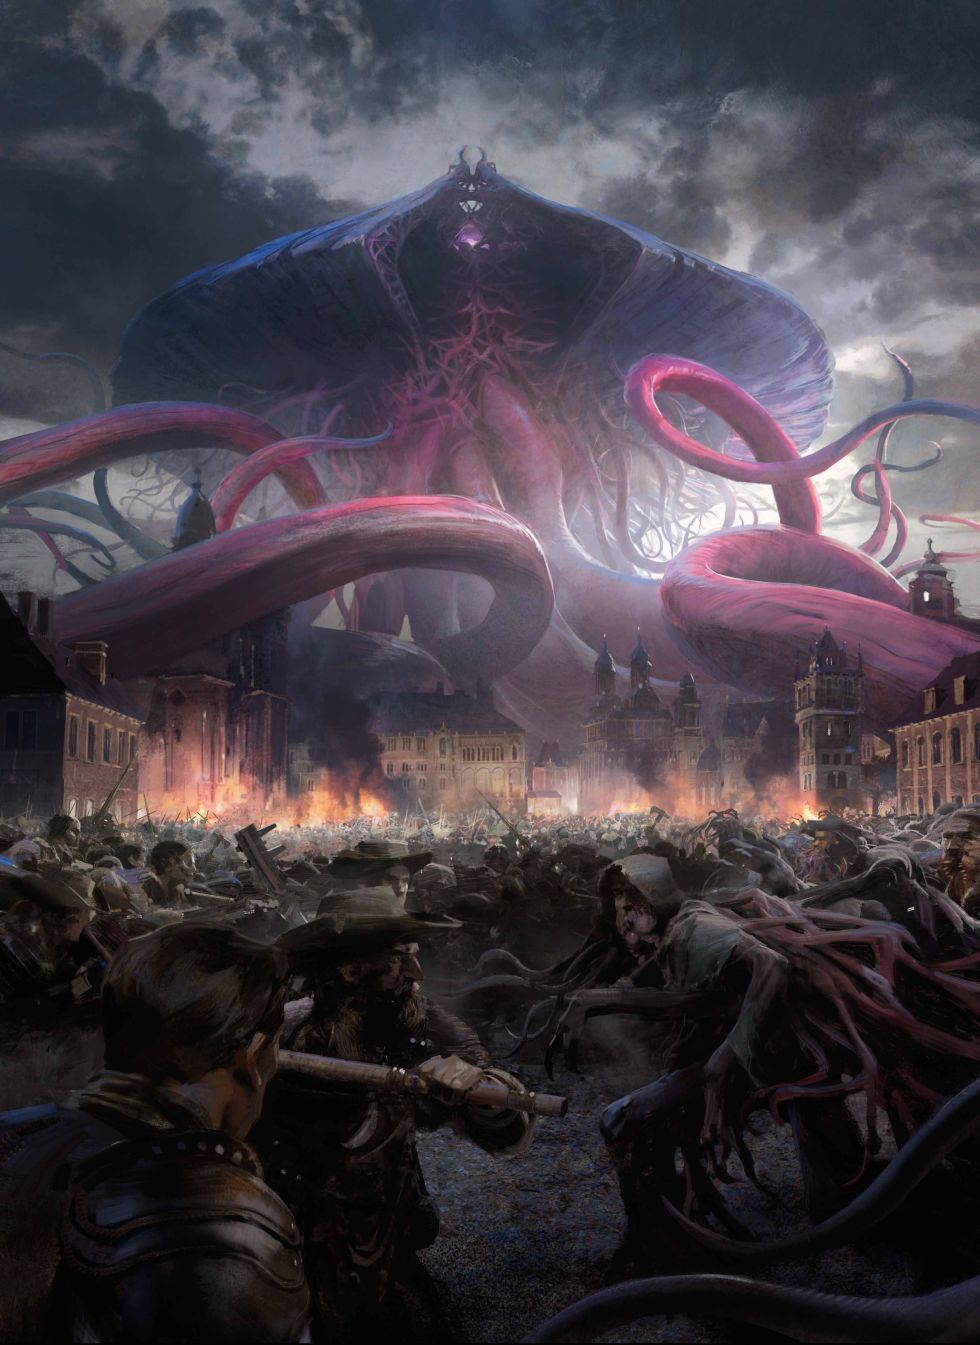 Surprise! It was Emrakul who had been hiding out in Innistrad and was causing some, er, issues.